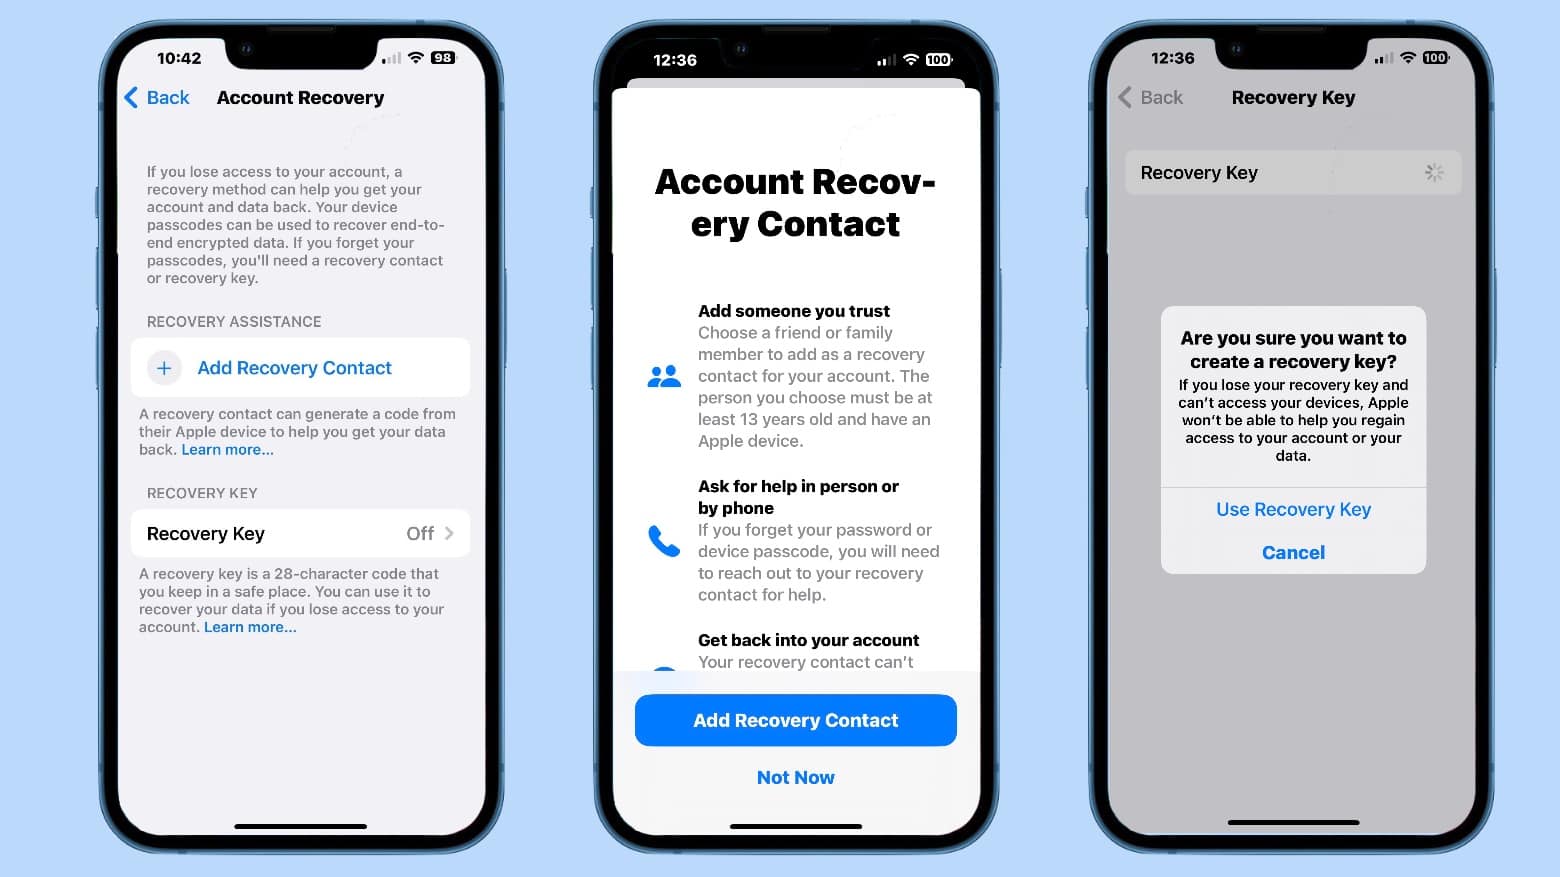 An iPhone screenshot of the Settings app showing Advanced Data Protection for iCloud recovery options: Your options when using Advanced Data Protection for iCloud are to name a recovery contact or create a recovery key.